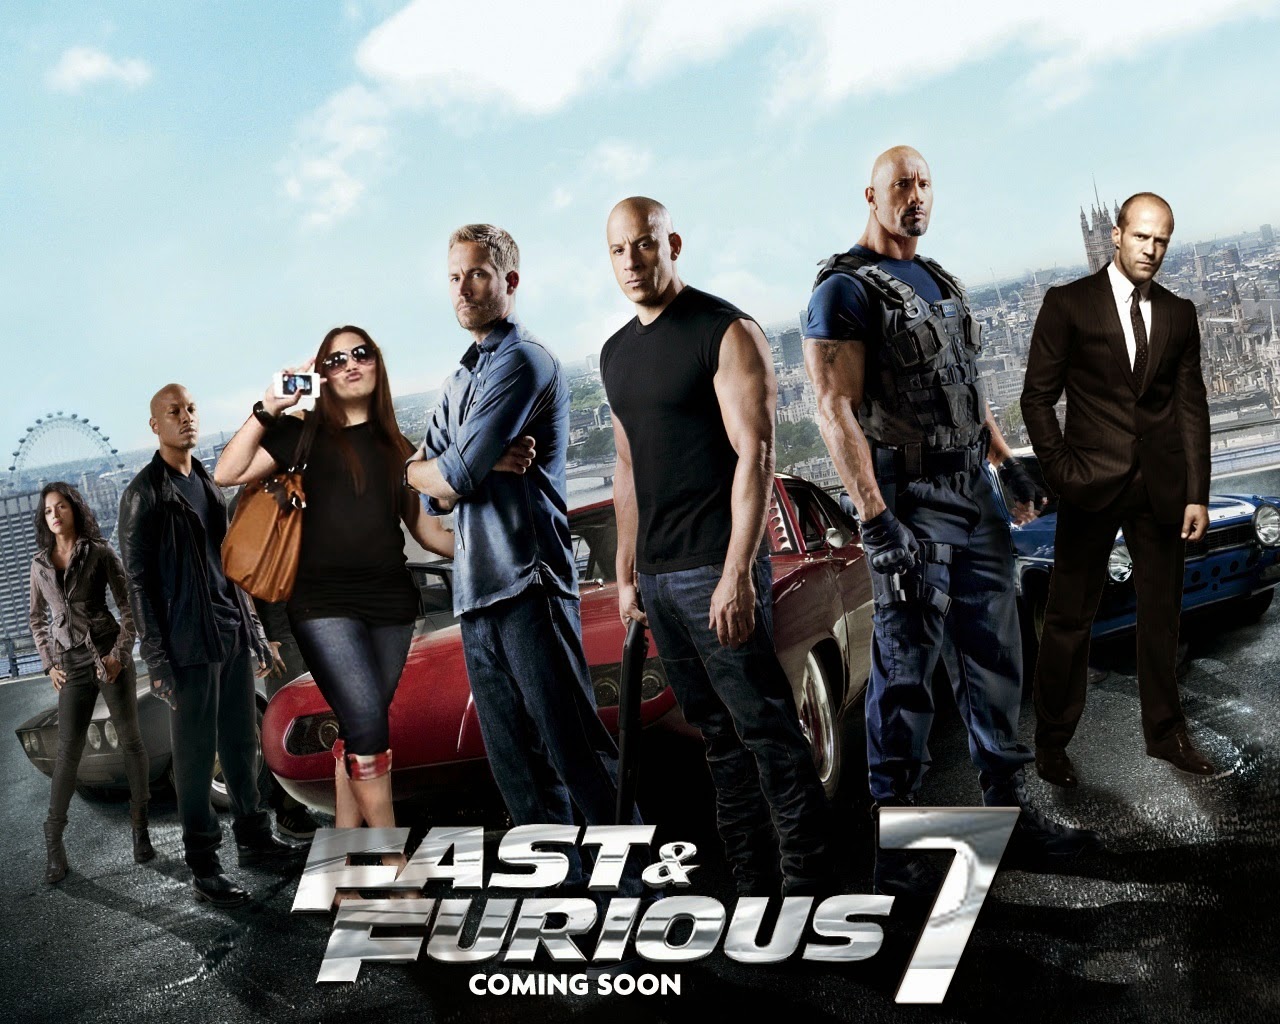 Tamil-Hd-Movies-Download-1080p-Fast-And-Furious-8-(English)